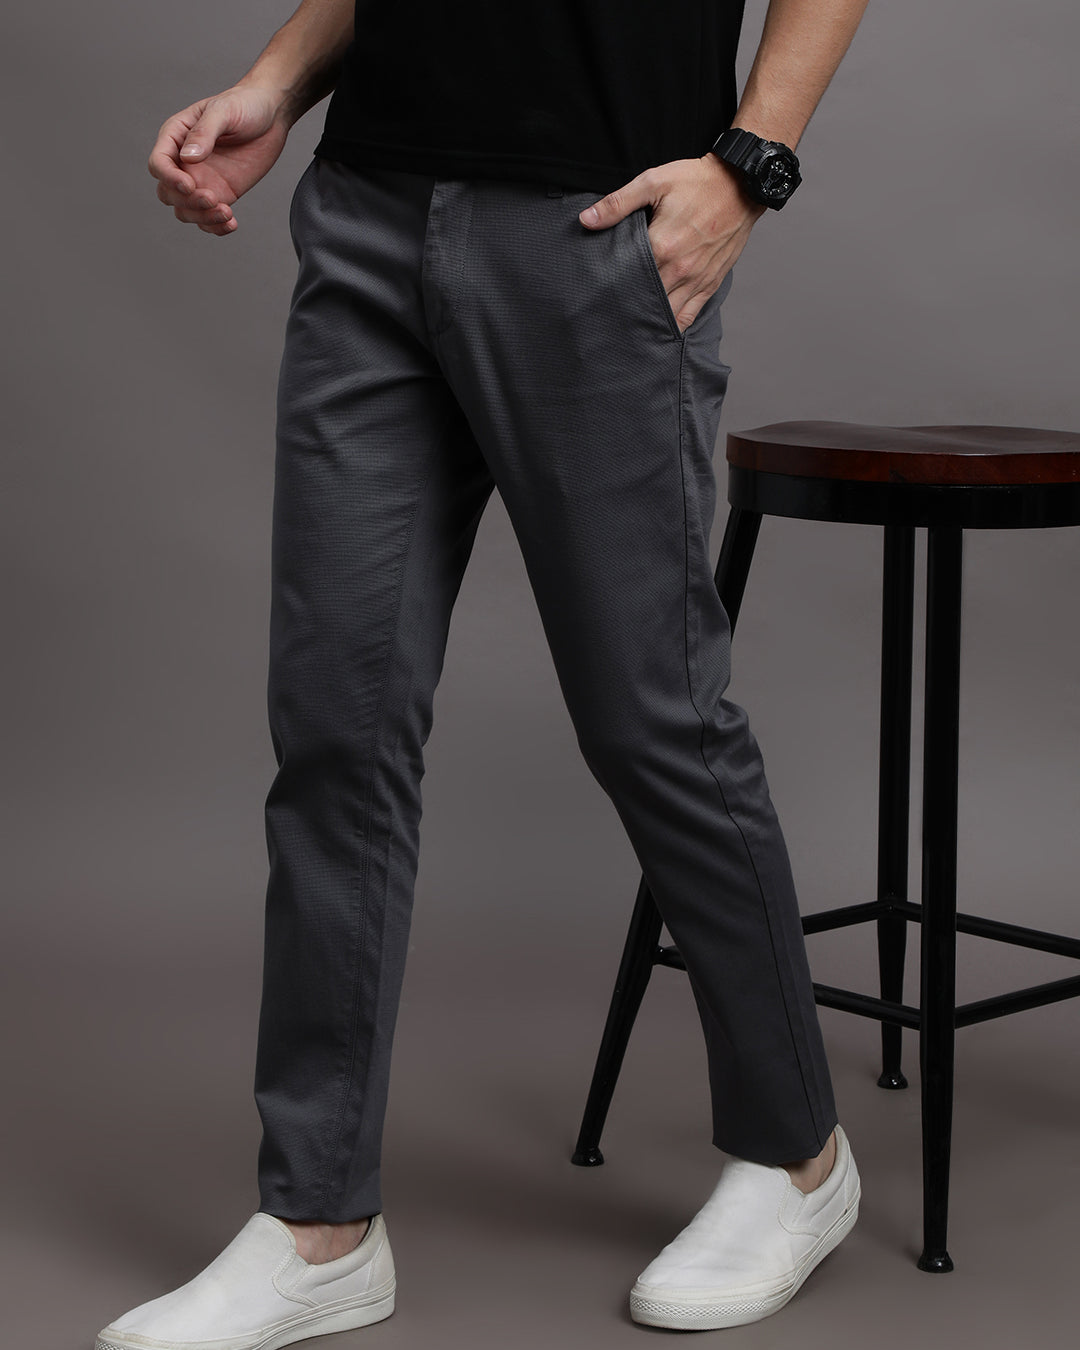 TEXTURED FABRIC TROUSER